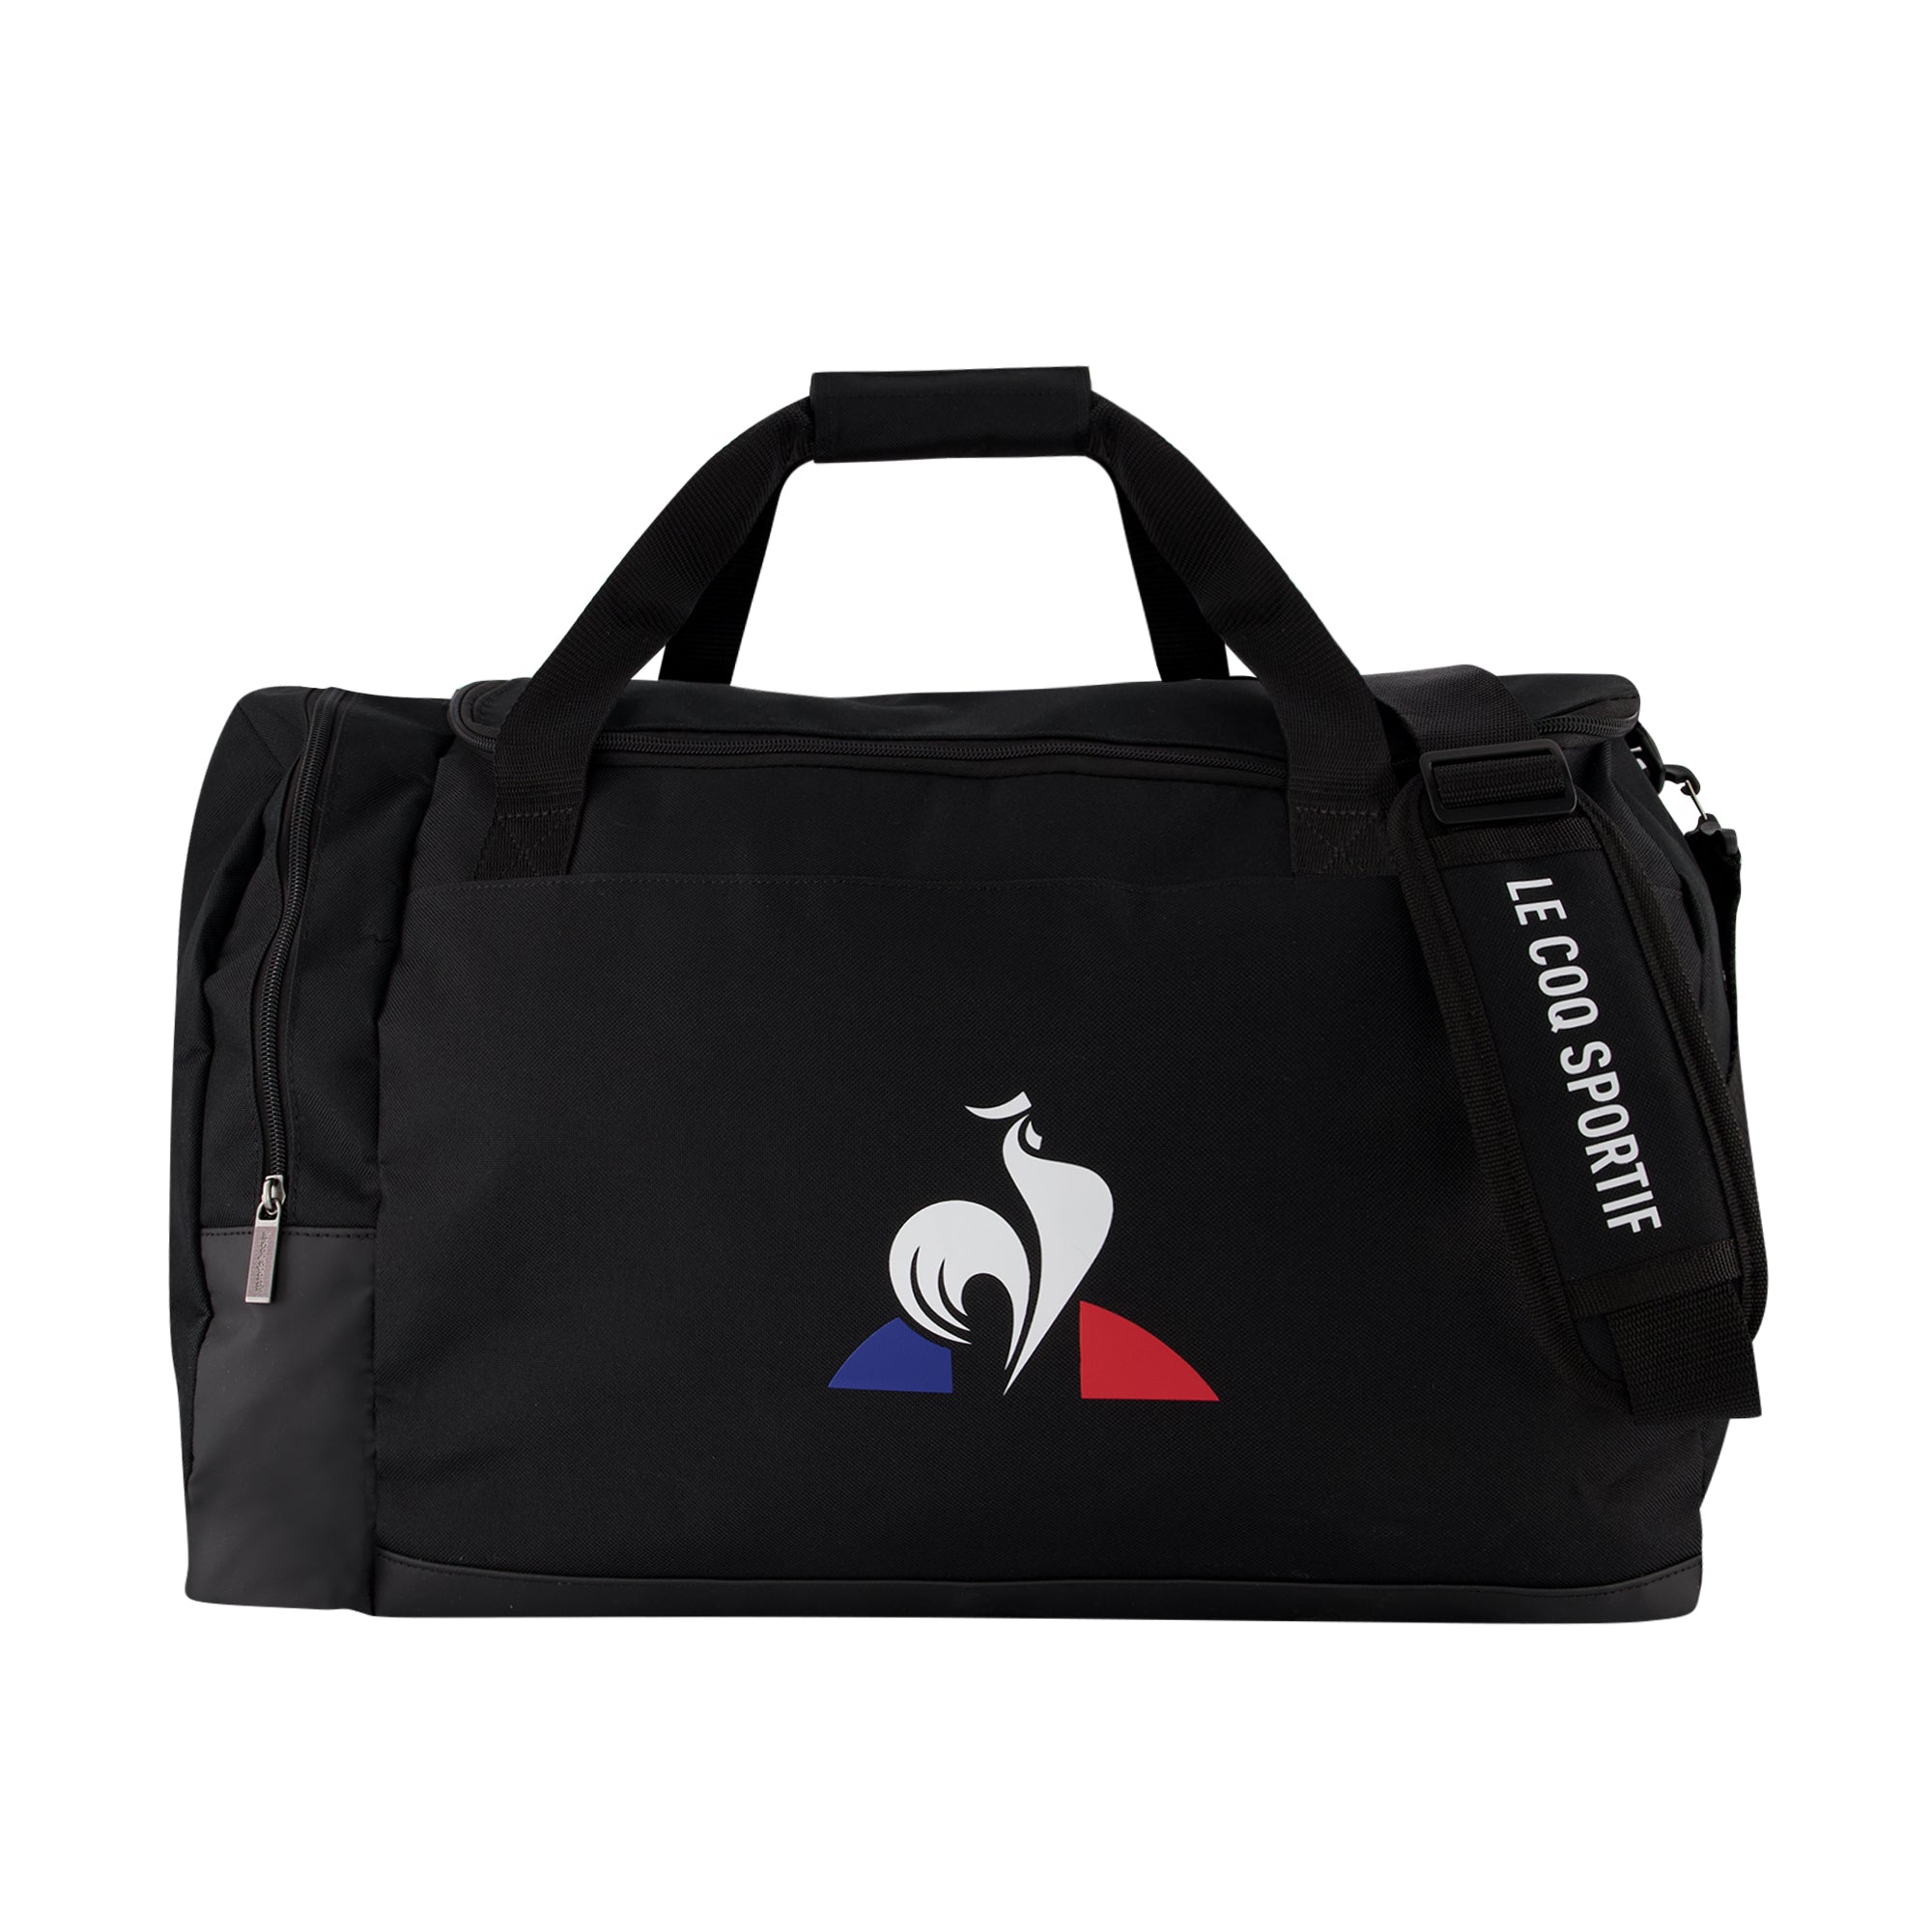 Women's Backpacks and sports bags – Le Coq Sportif